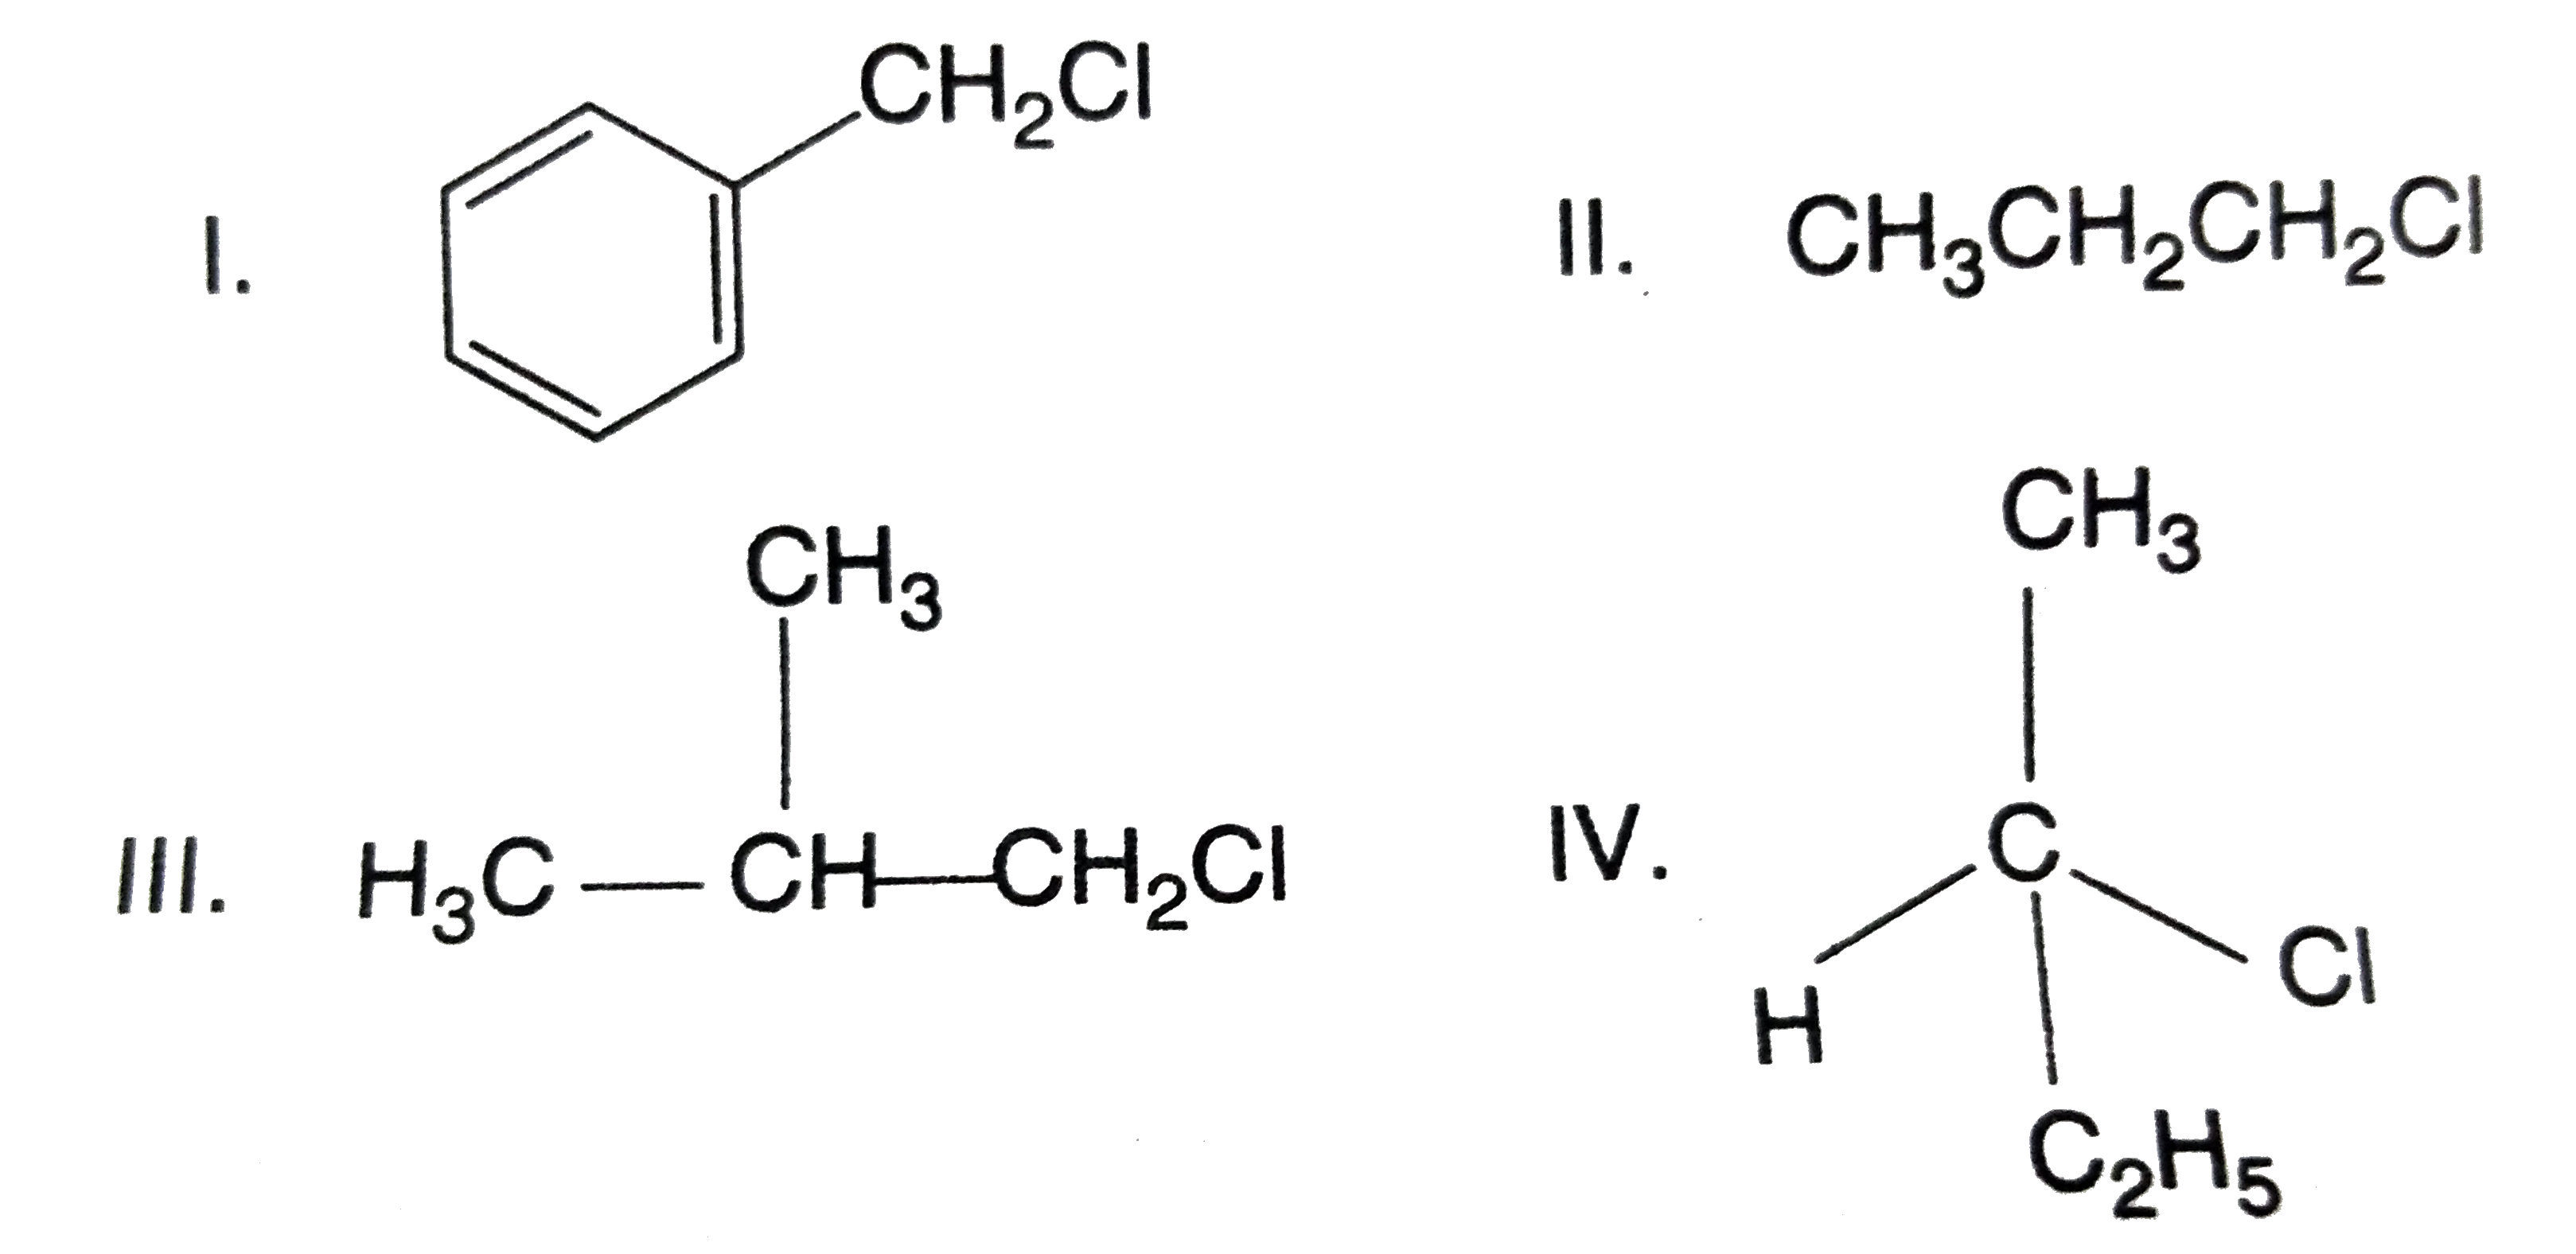 Which of the following compounds will undergo racemisation upon alkaline KOH hydrolysis ?